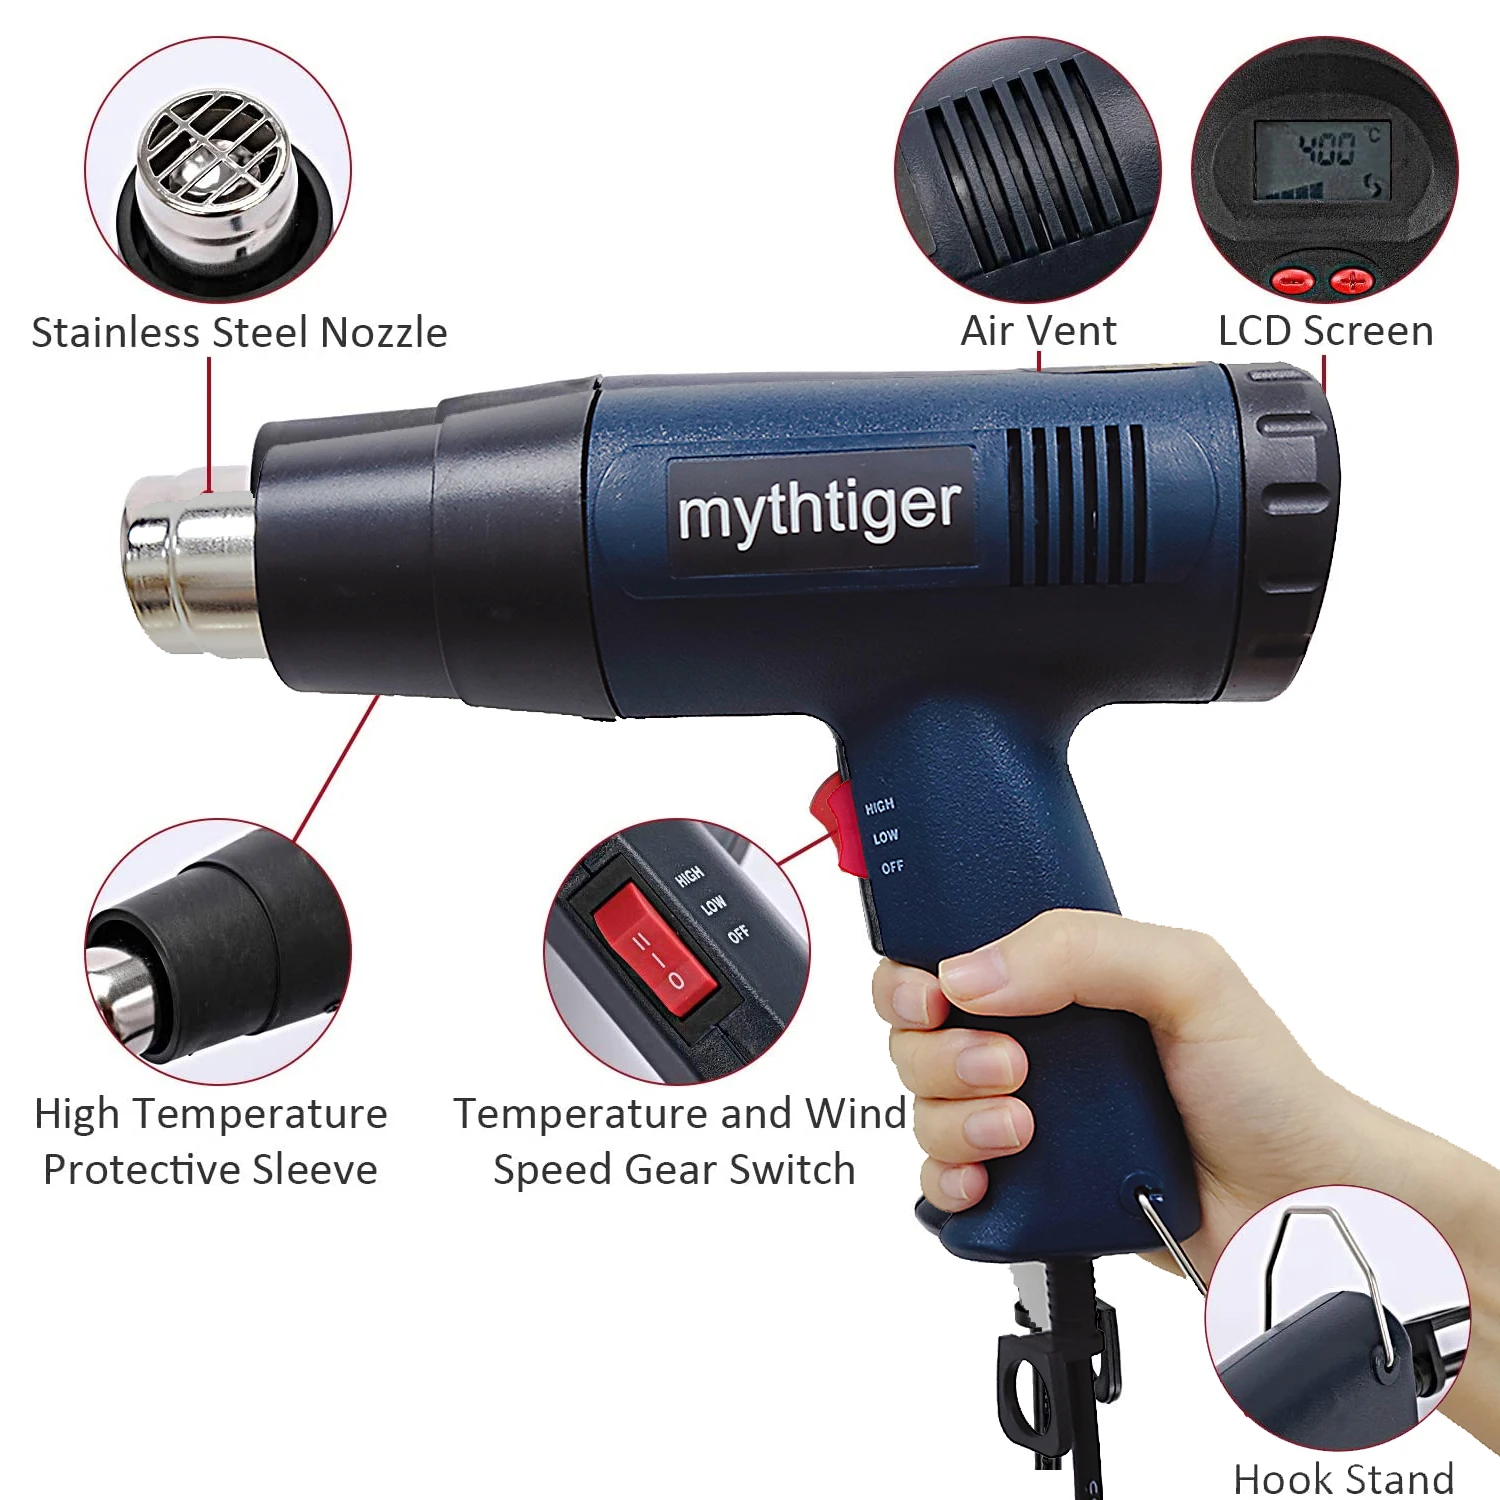 Professional Hot Air Dryer for Welding, Hot Air Gun With LCD Display, DIY  Power Tool, Hot Air Gun with Plastic Carrying Case